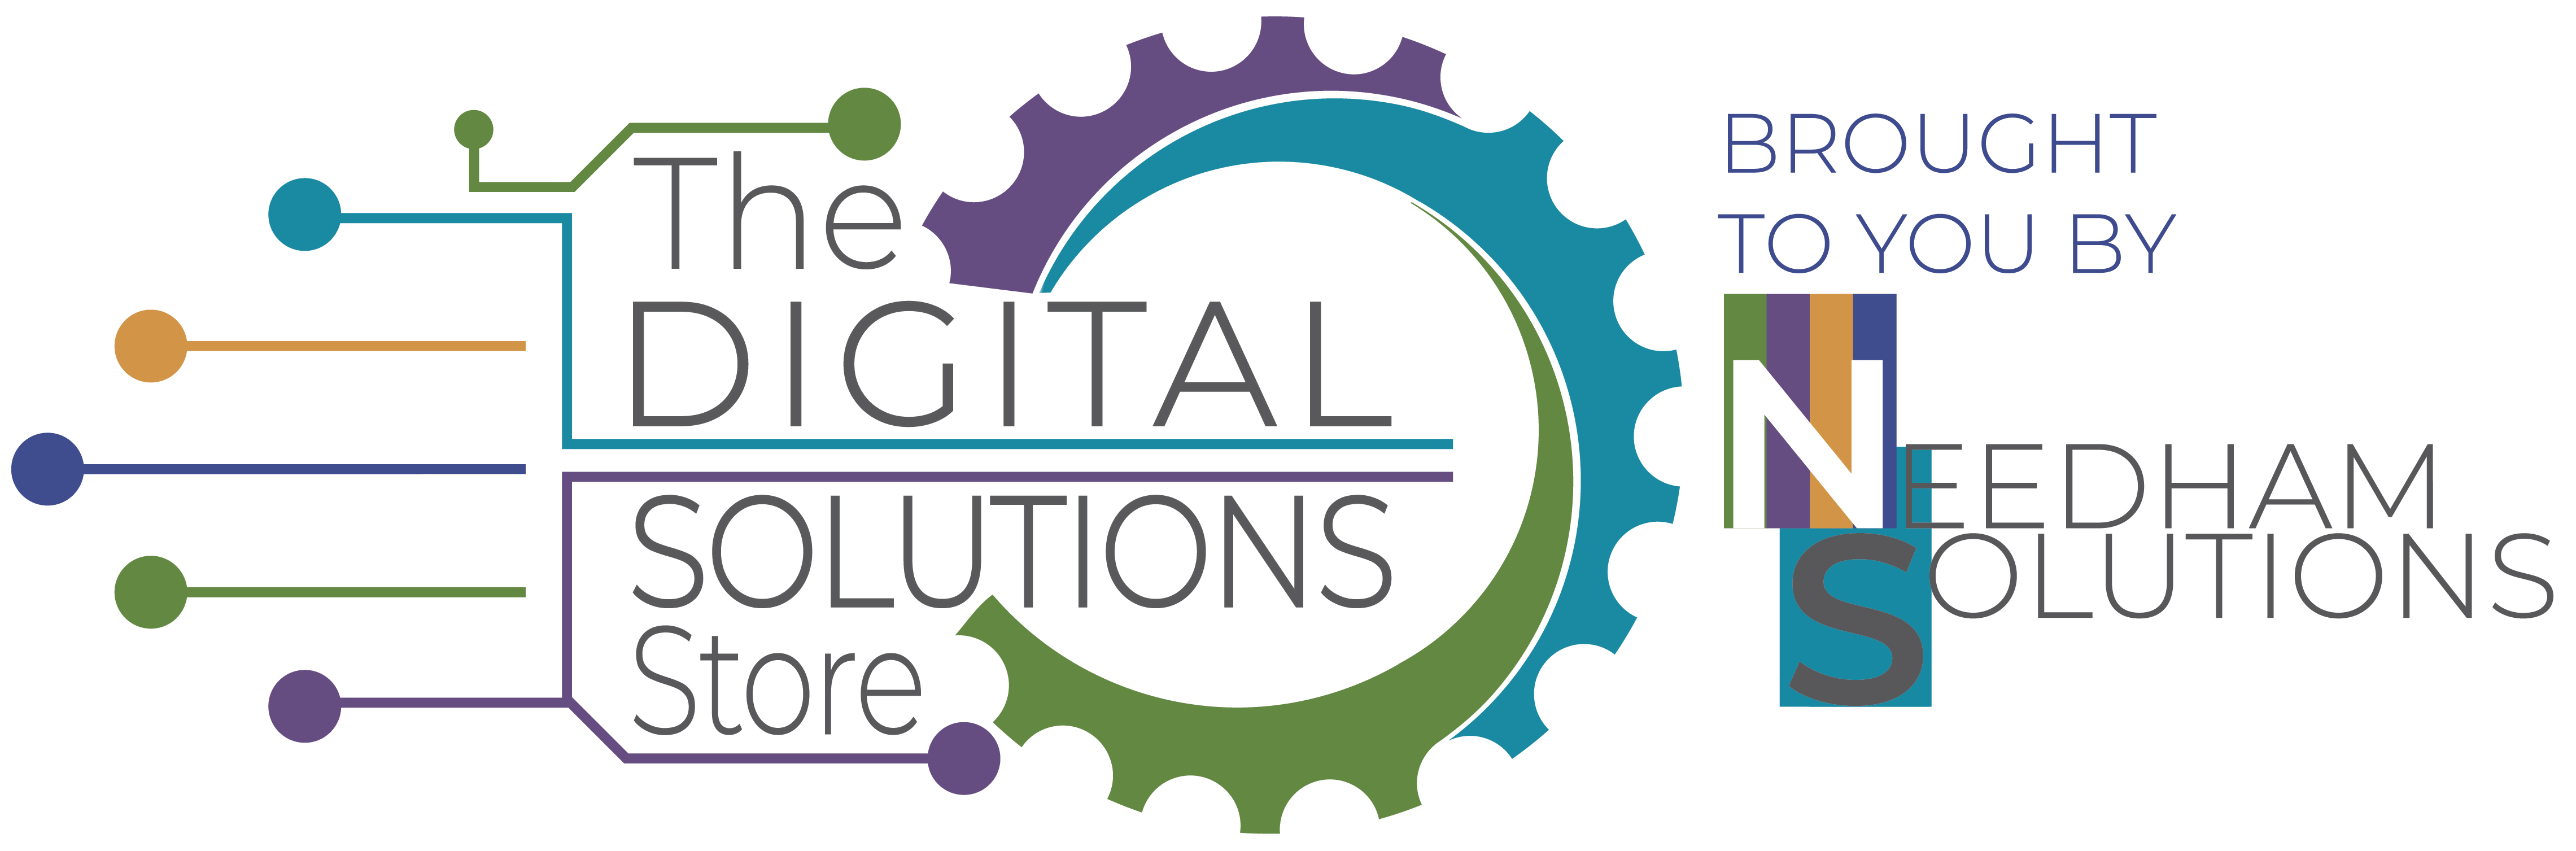 The Digital Solutions Store